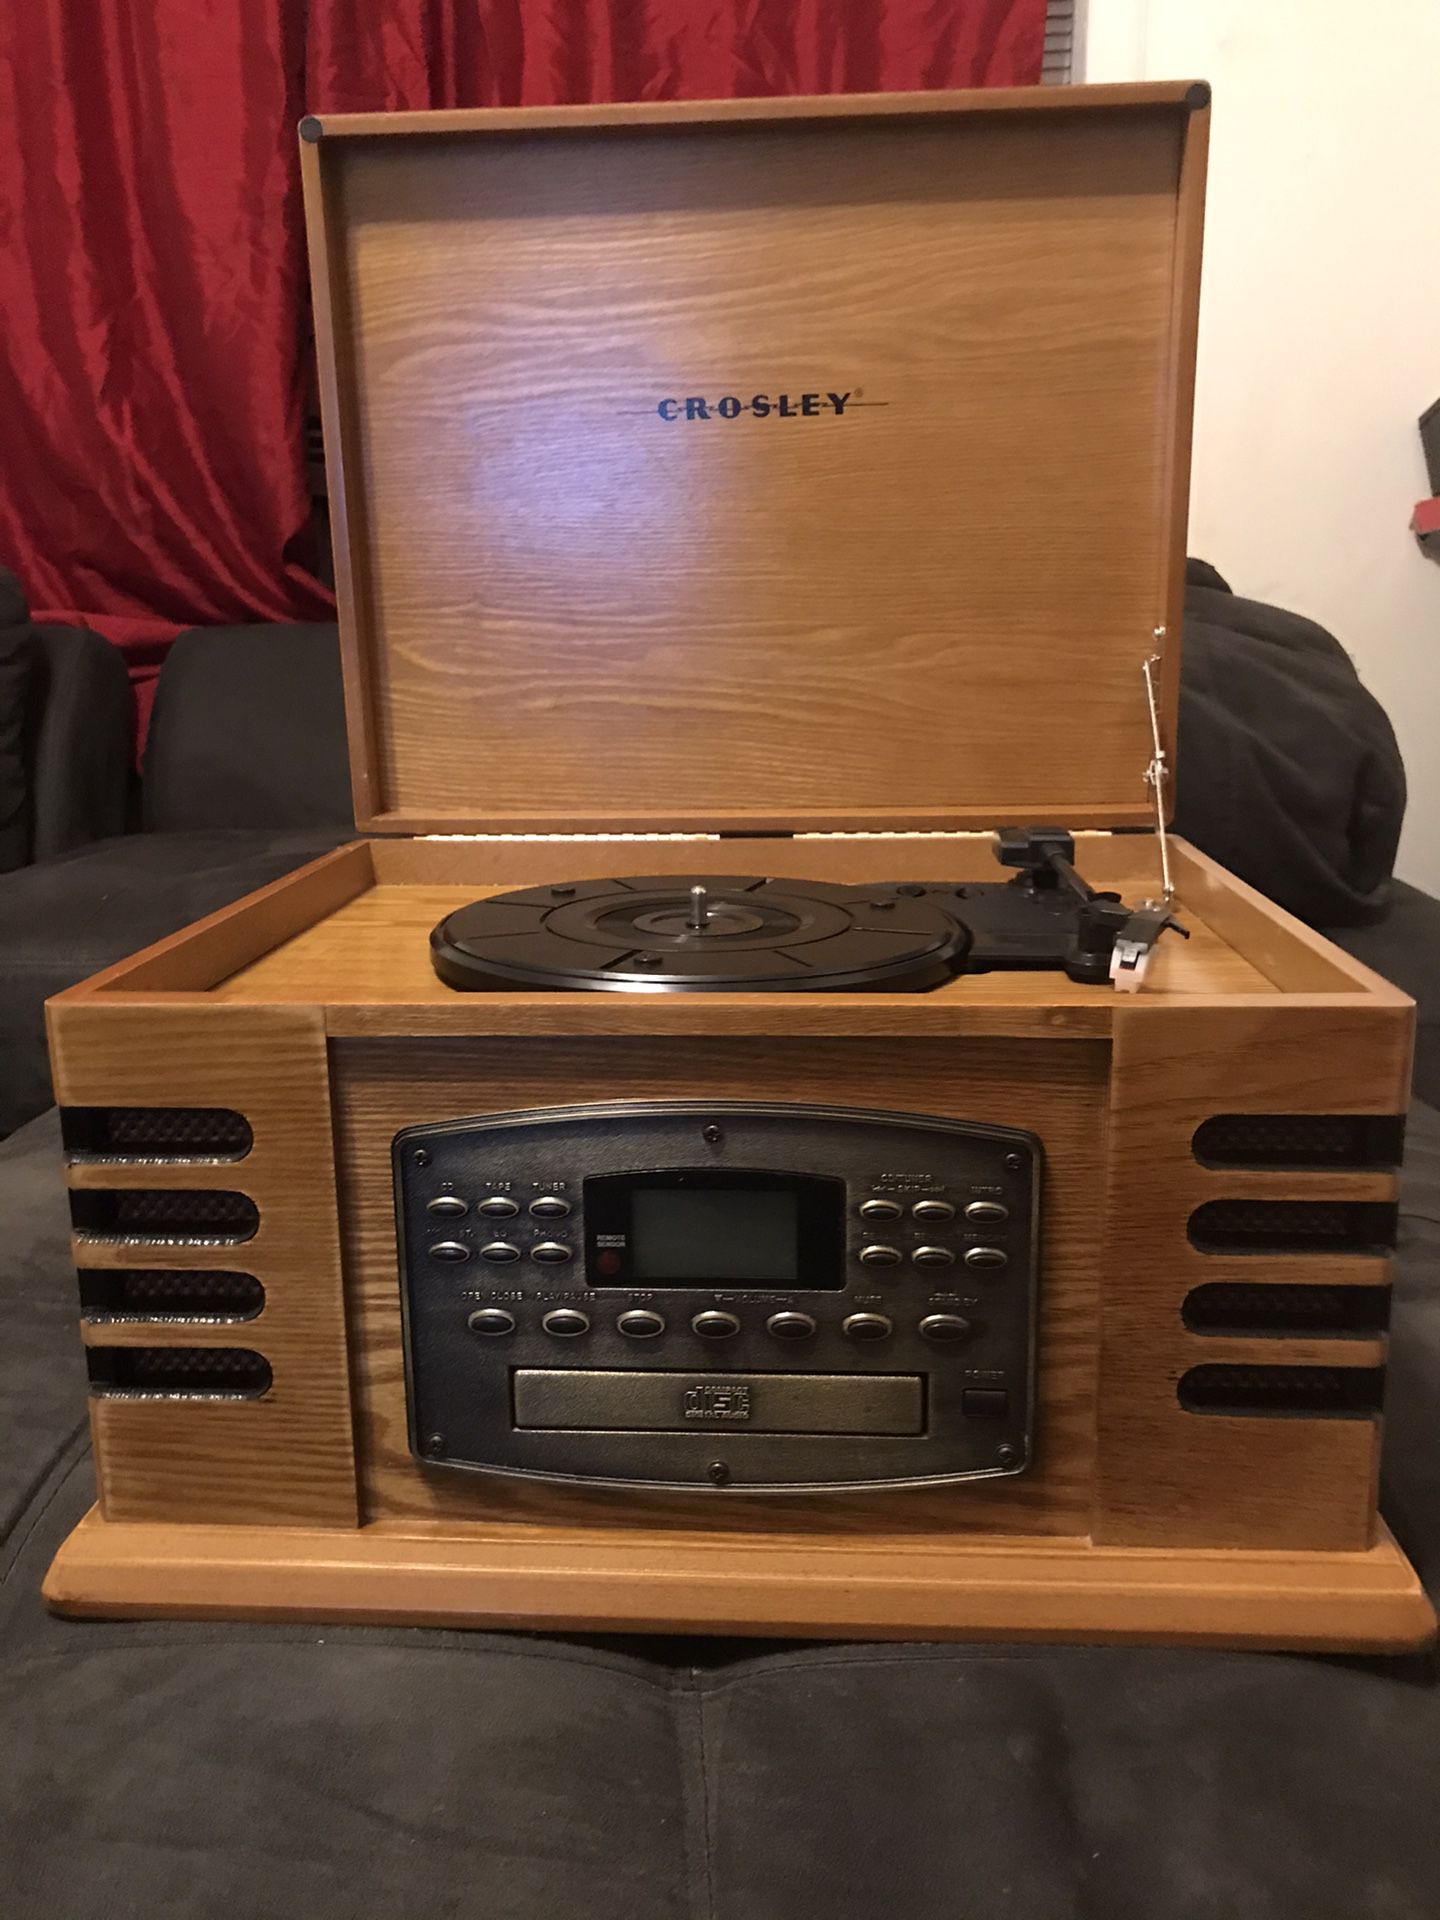 Crosley 4 in 1 stereo systems